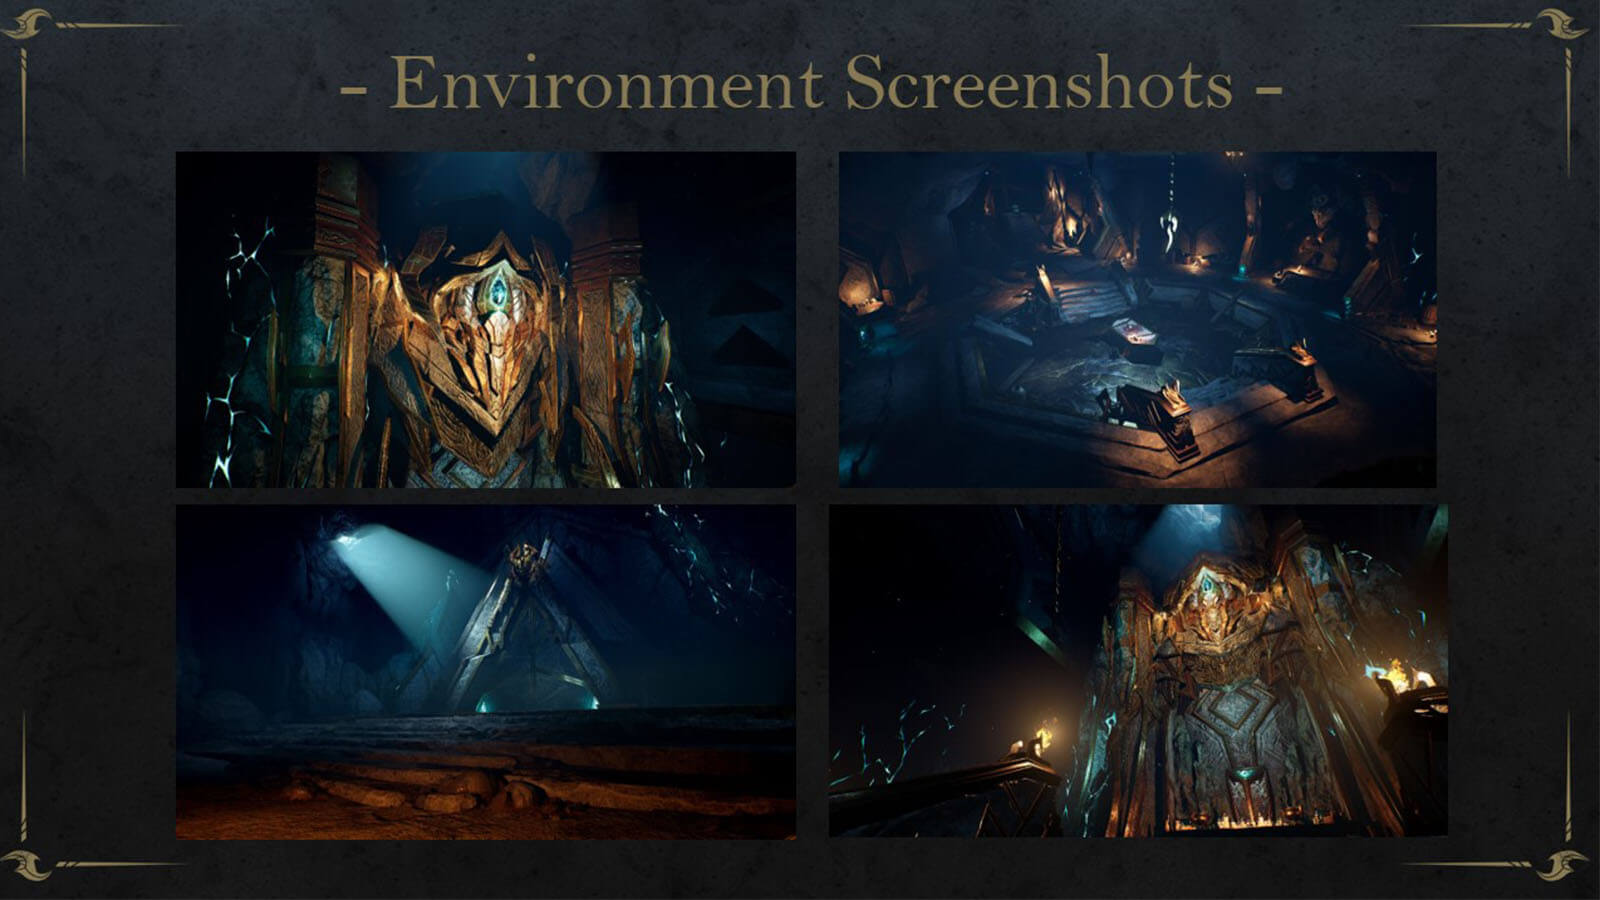 Still image depicting four separate environment screenshots of a 3D dungeon